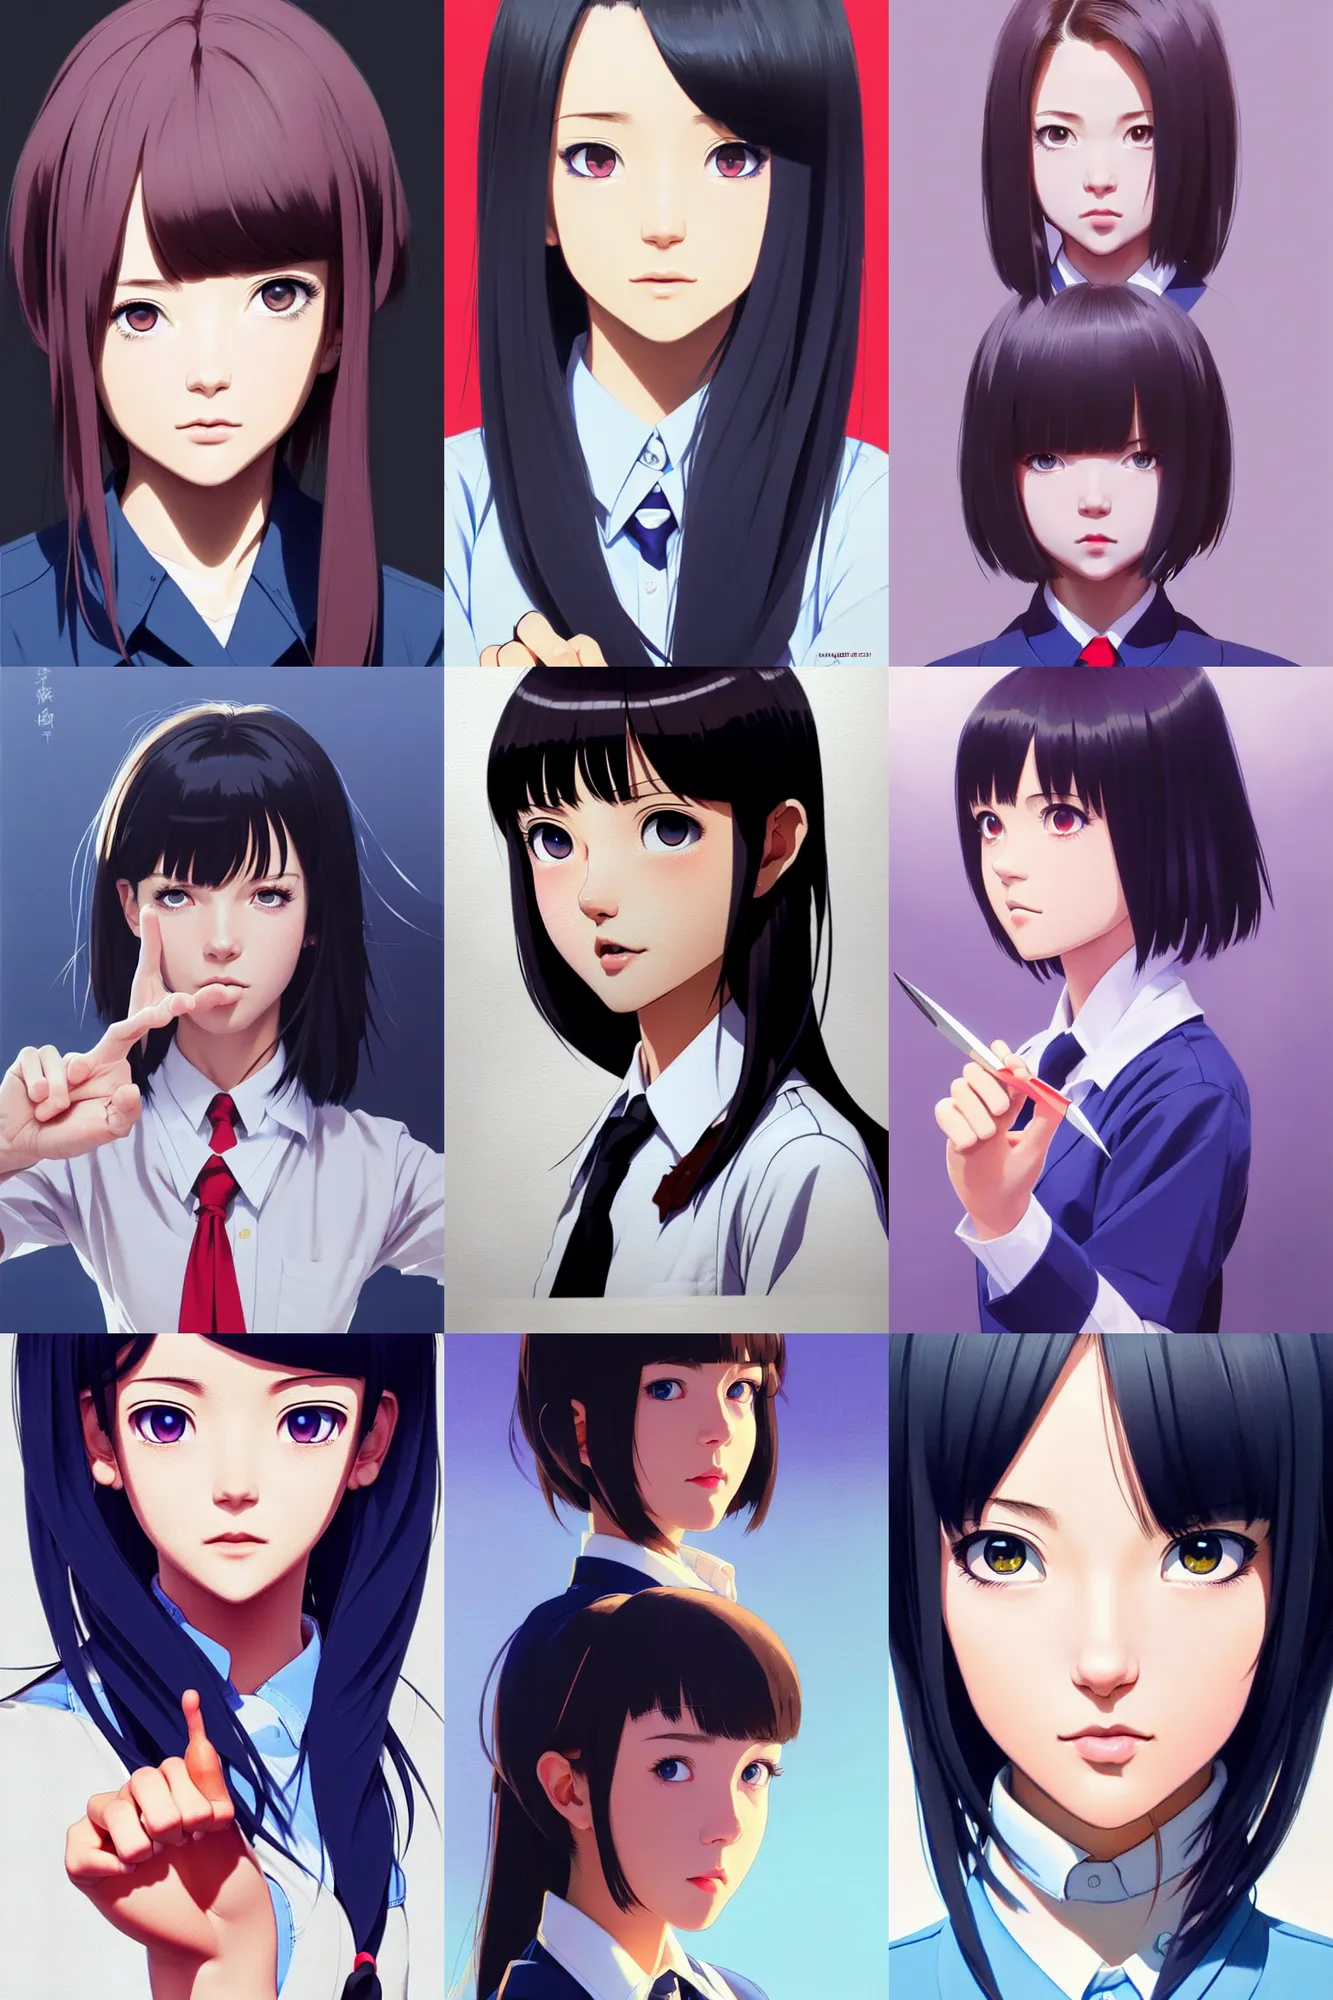 Prompt: a cute girl wearing school uniform making scissor hand gesture | | really good looking face!!, realistic shaded perfect face, fine details, anime, realistic shaded lighting poster by ilya kuvshinov katsuhiro otomo ghost - in - the - shell, magali villeneuve, artgerm, jeremy lipkin and michael garmash and rob reyt